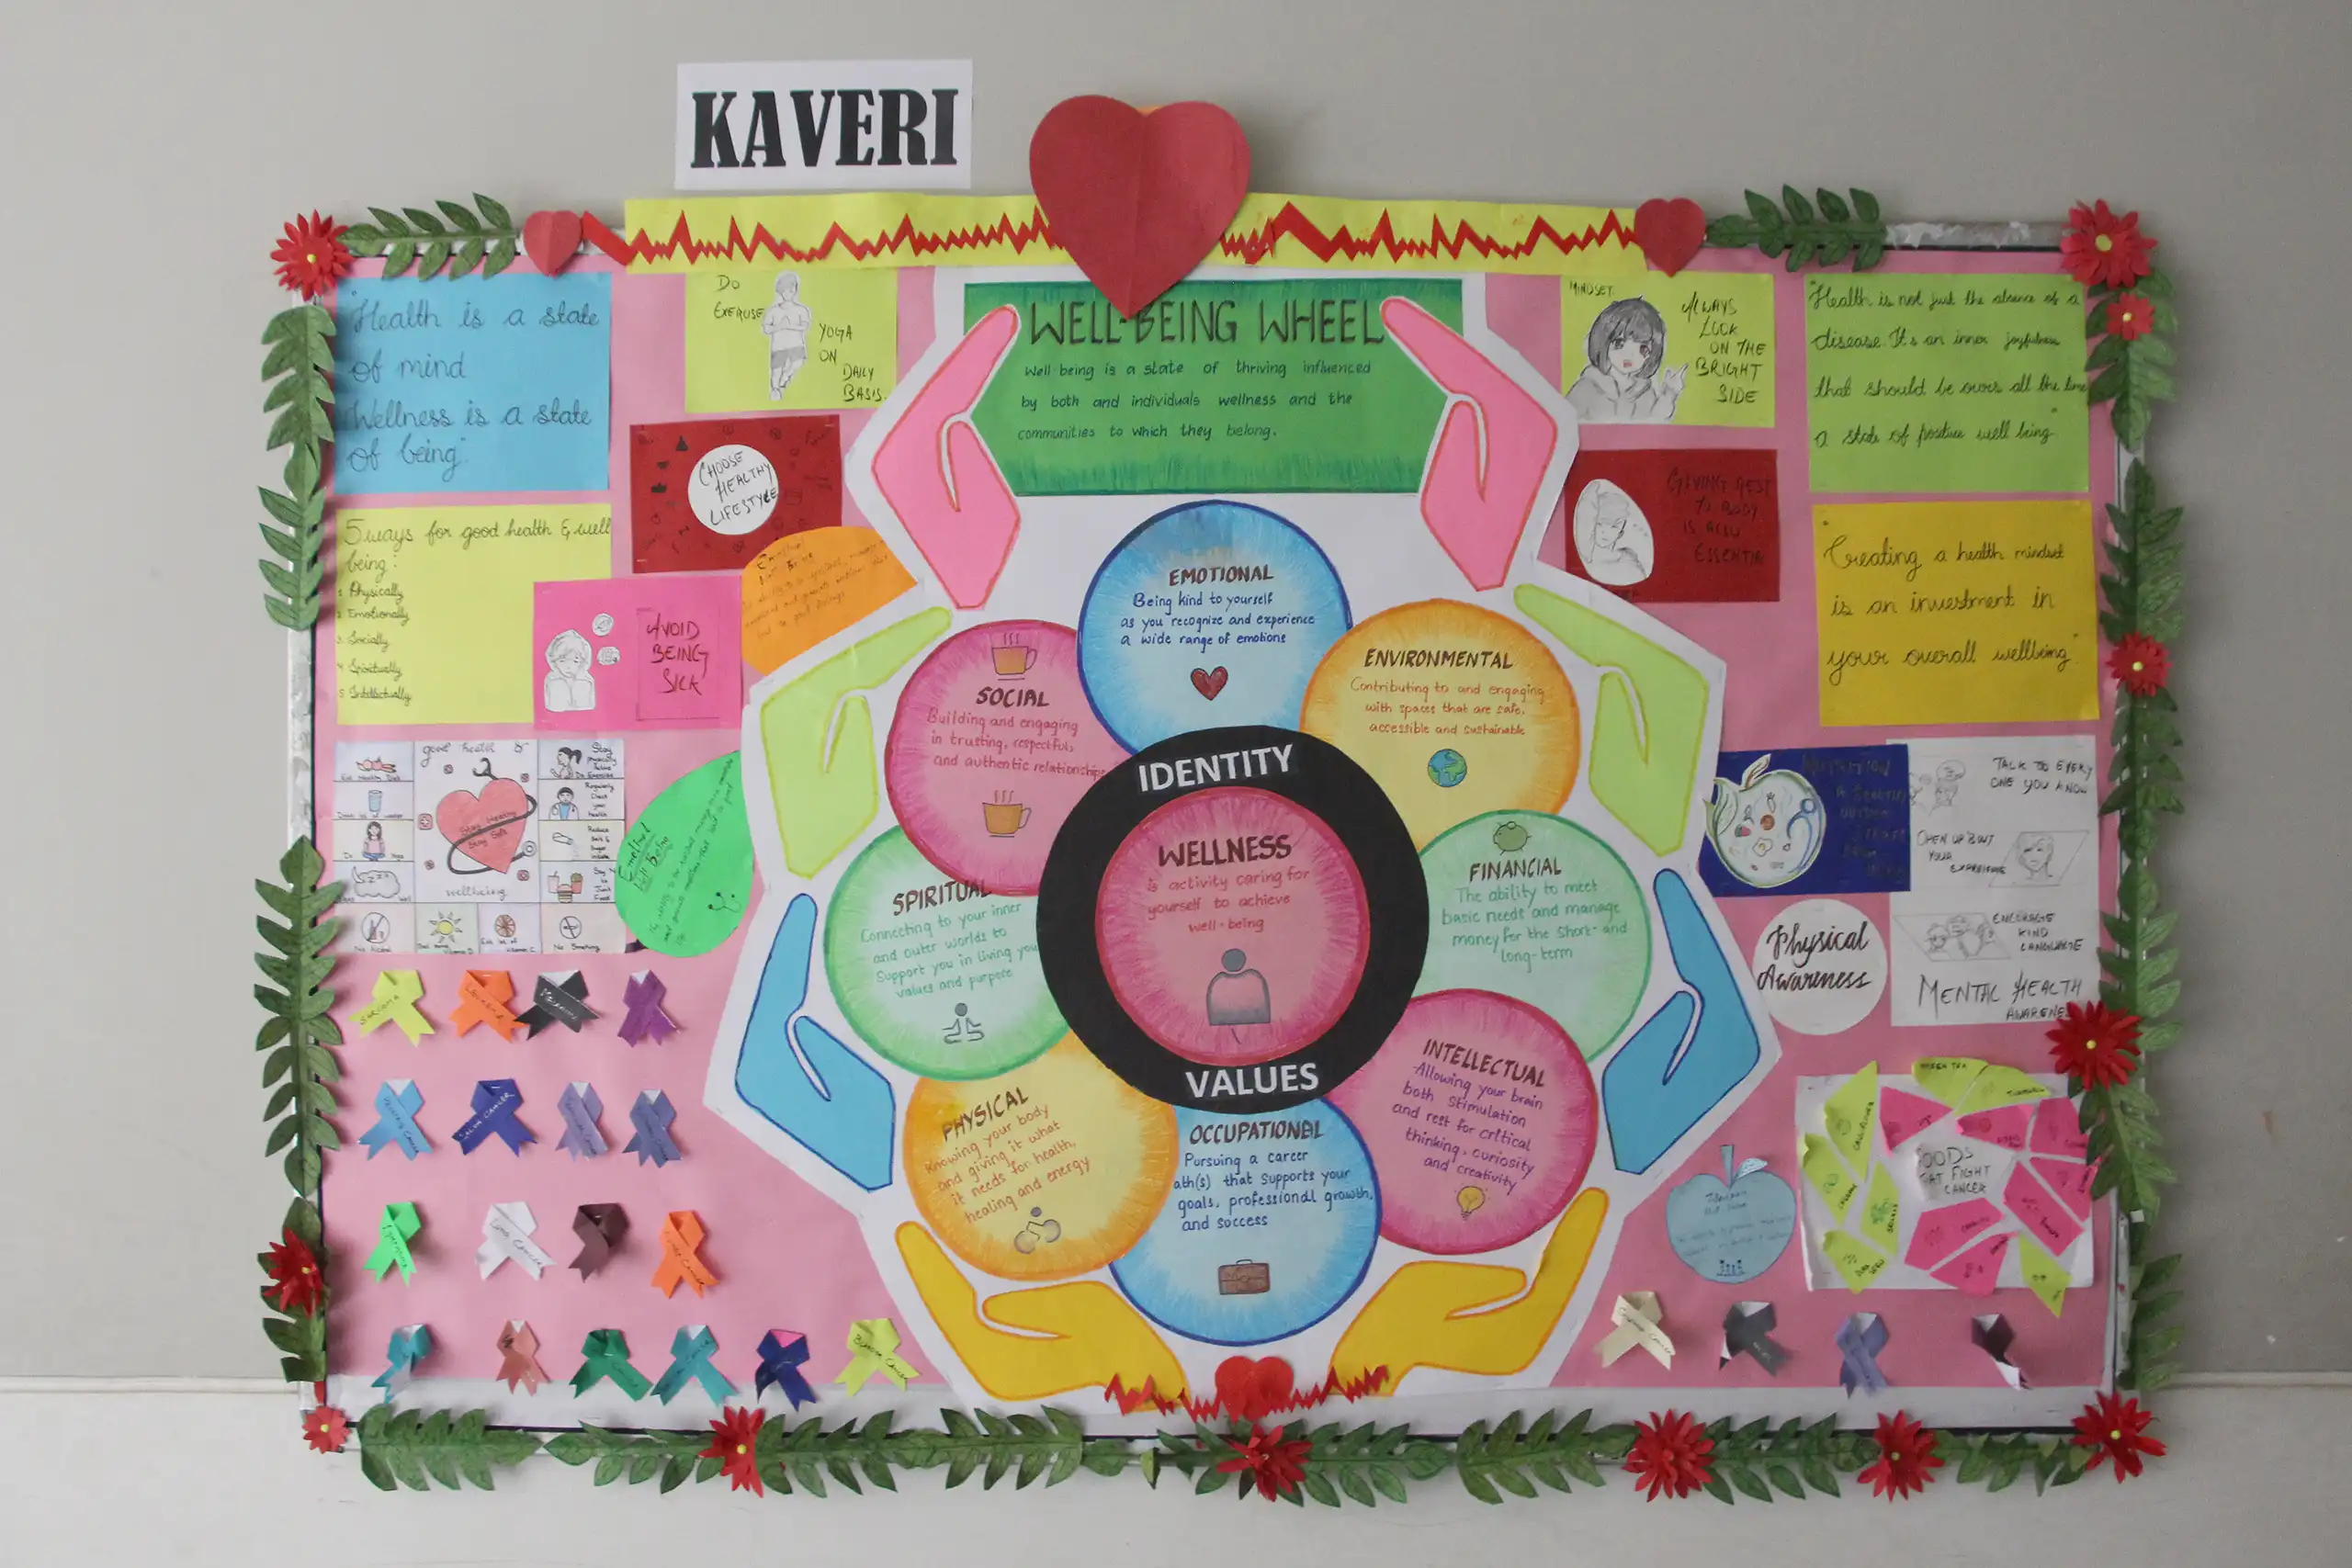 Kaveri house decorated the bulletin board with well being wheel during House-Wise Bulletin Board Competition.